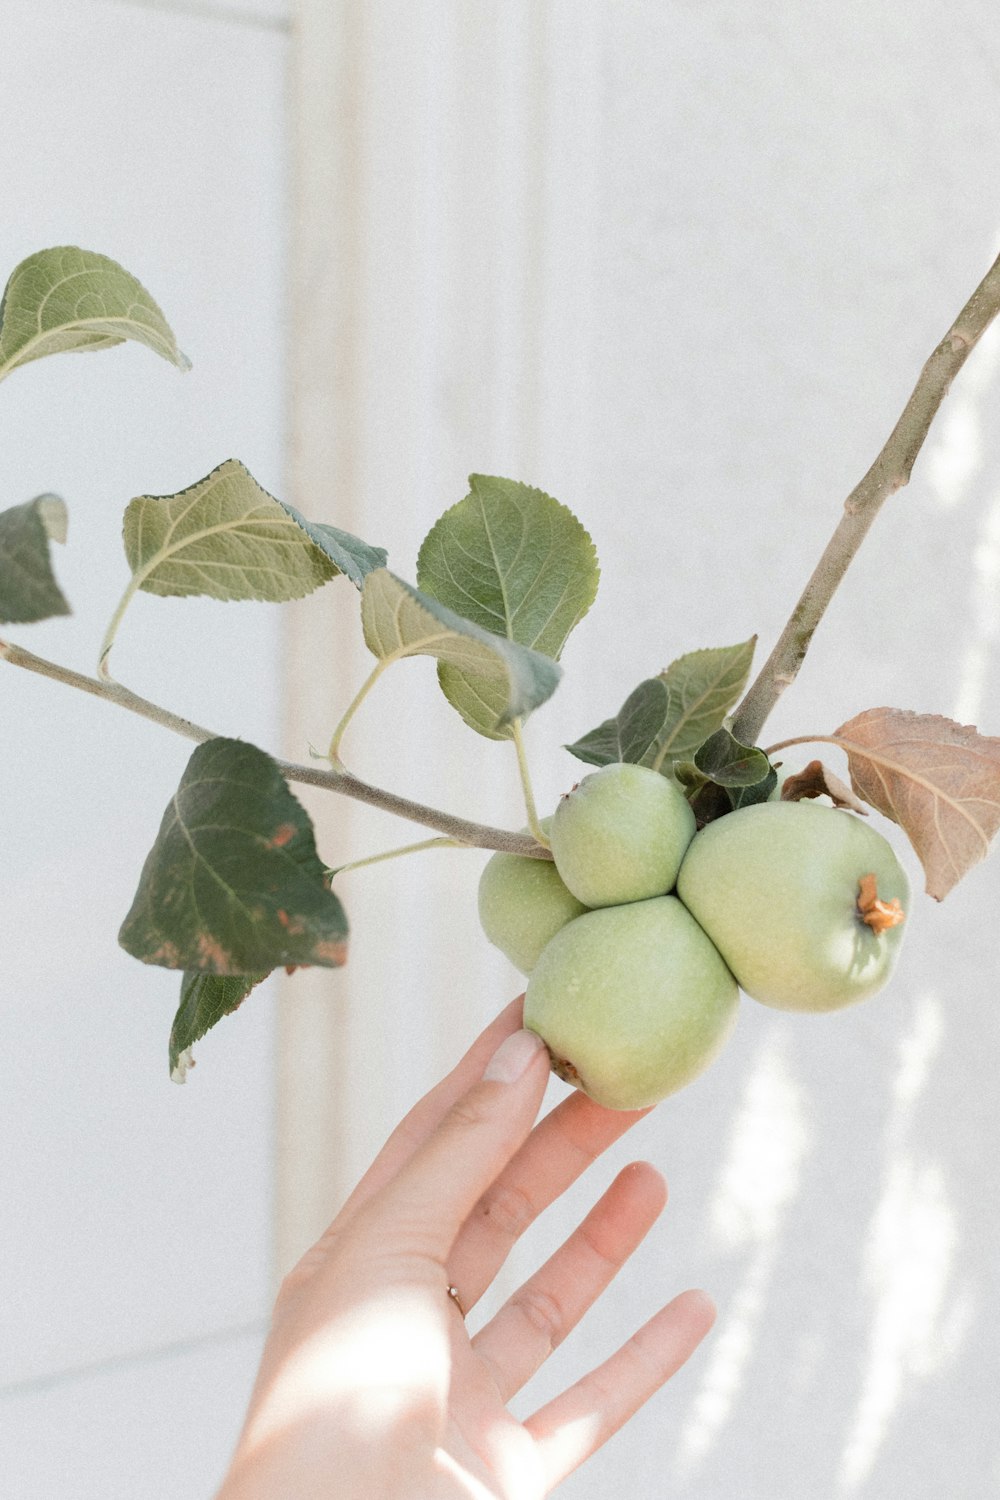 a hand holding a branch with green grapes on it